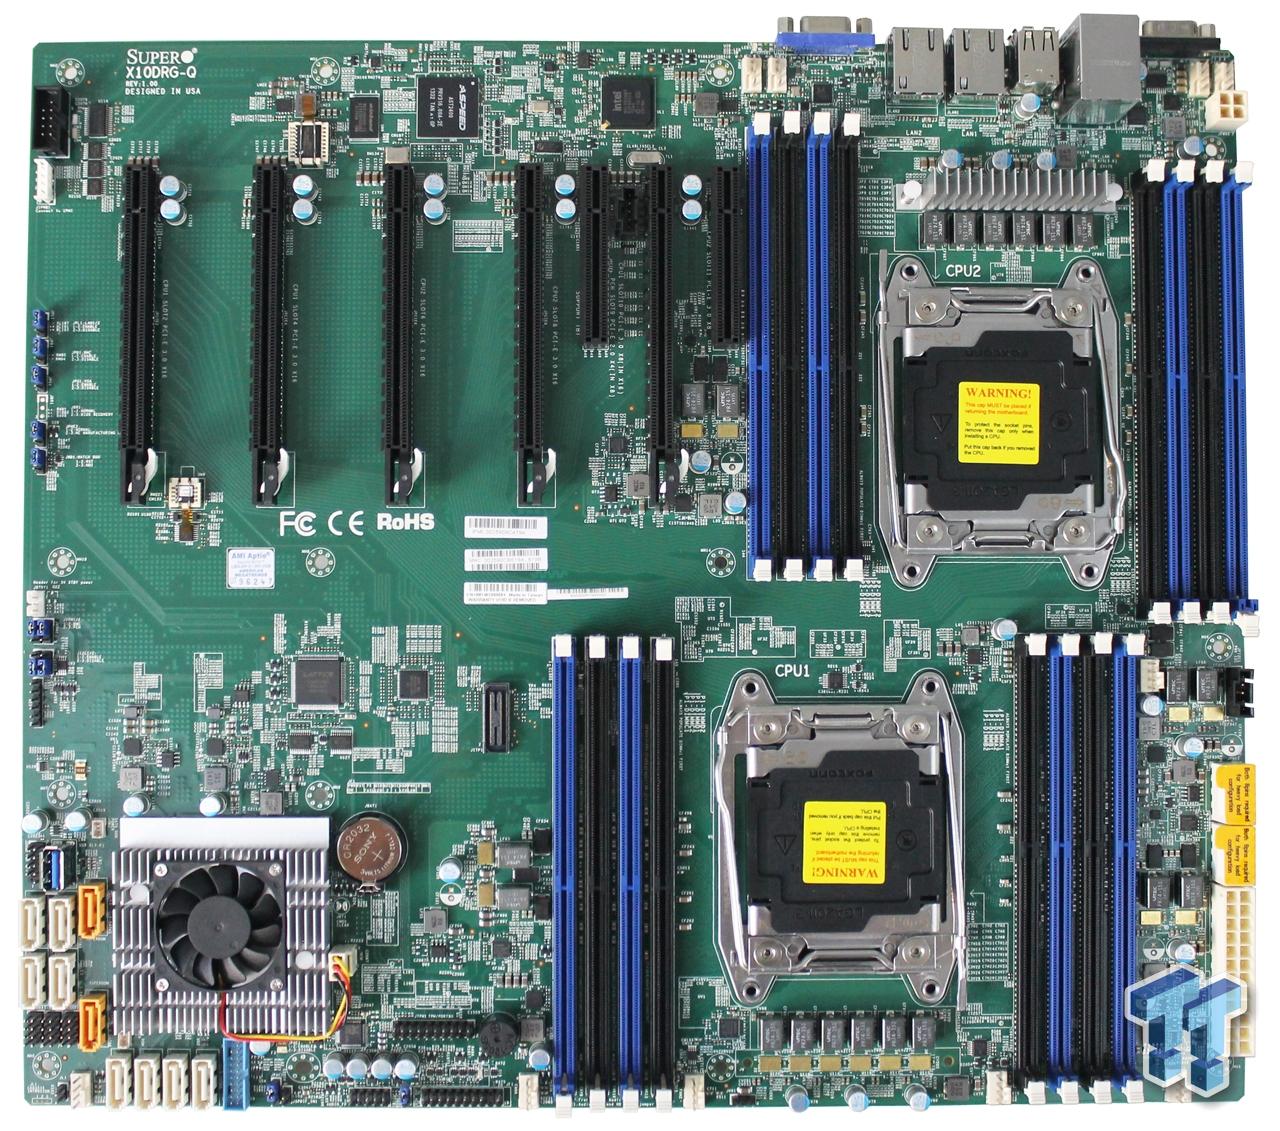 Supermicro X10DRG-Q (Intel C612) Workstation Motherboard Review